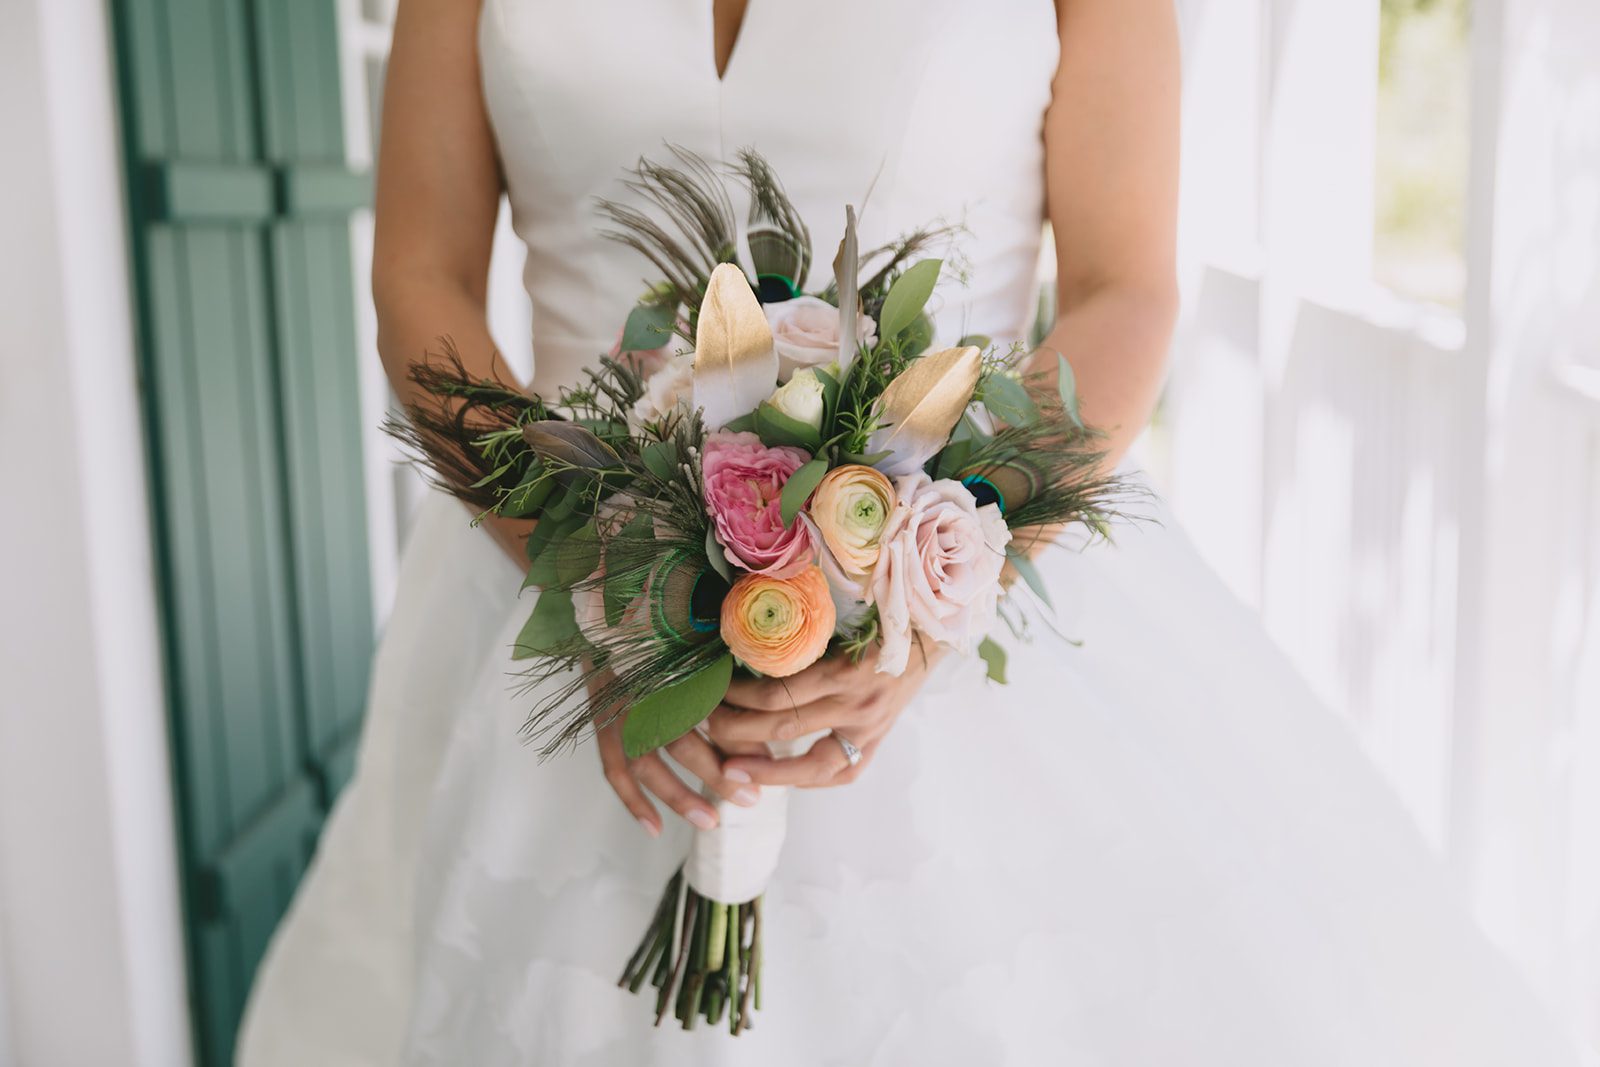 A bride holding a wedding bouquet in front of a porch.